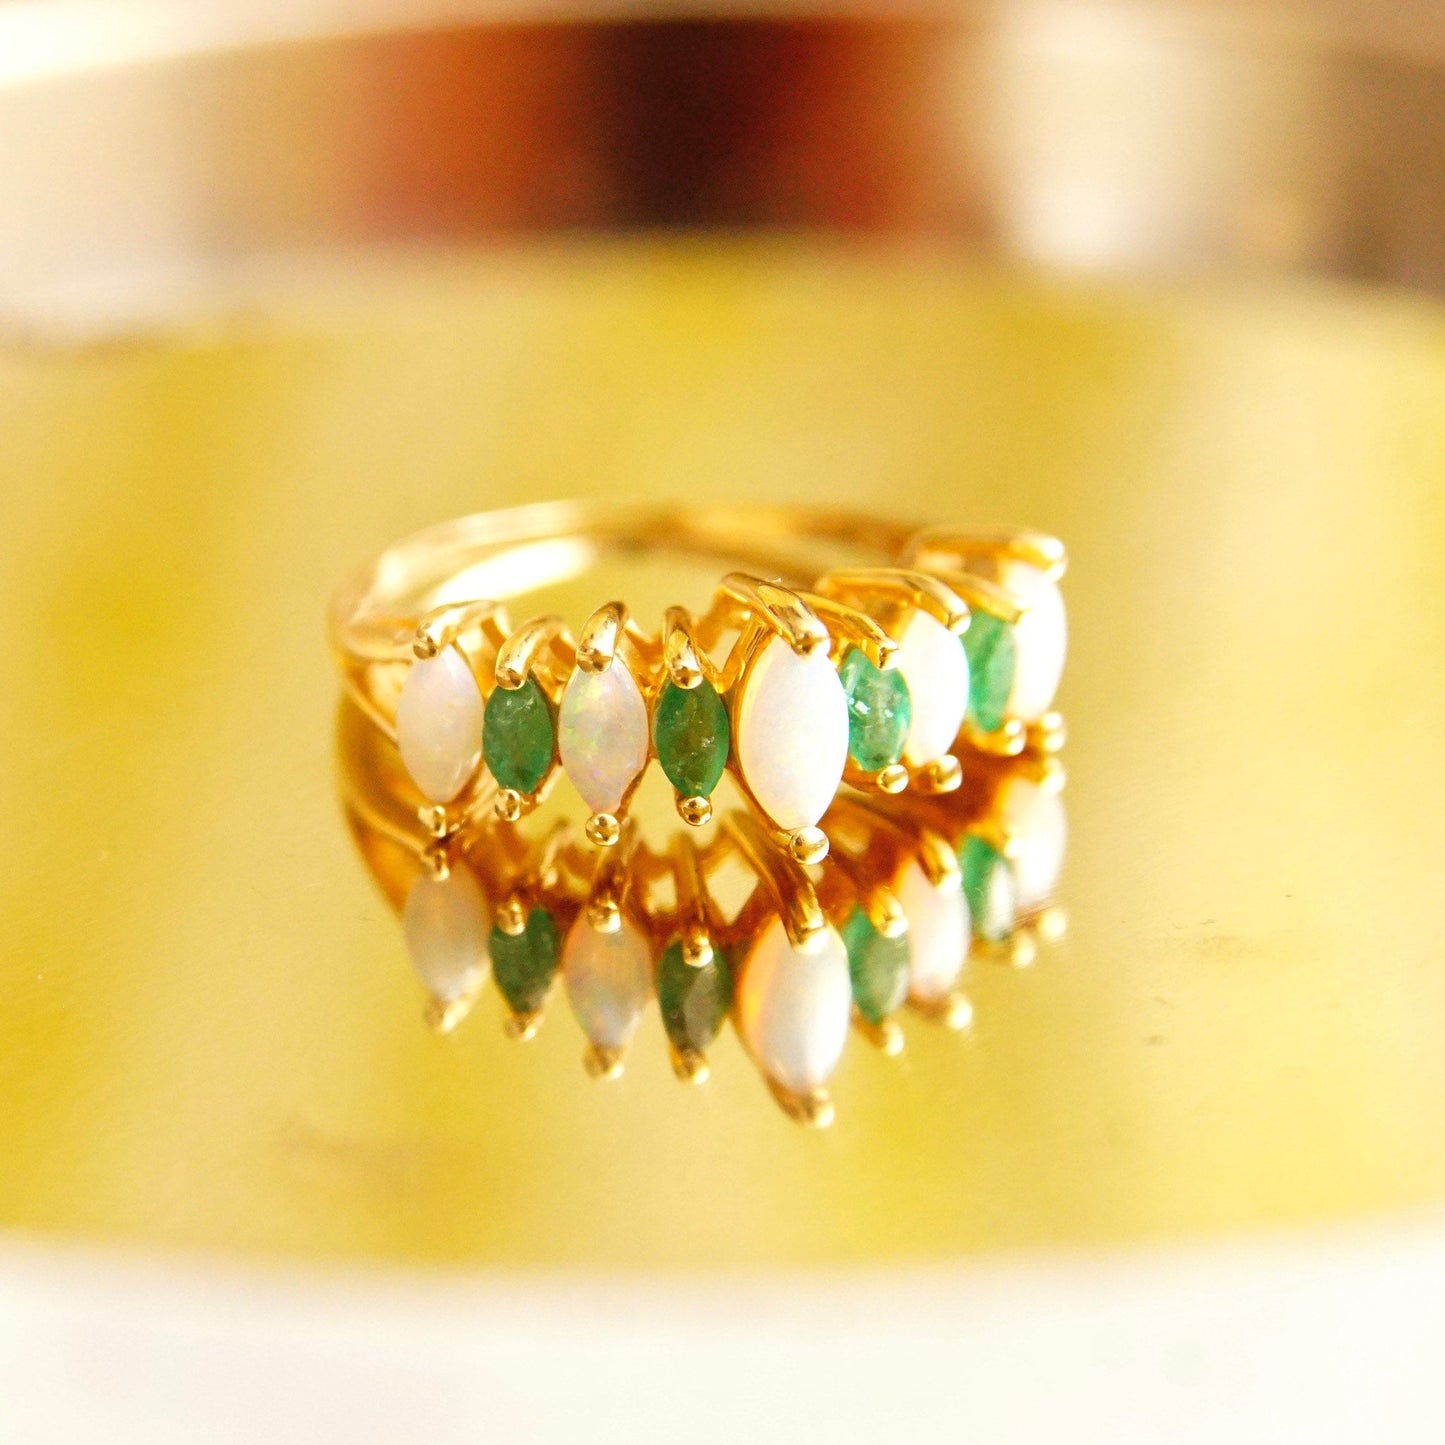 14K gold cocktail ring with marquise opals and emerald accents in a cluster design, estate jewelry, size 6 1/4 US